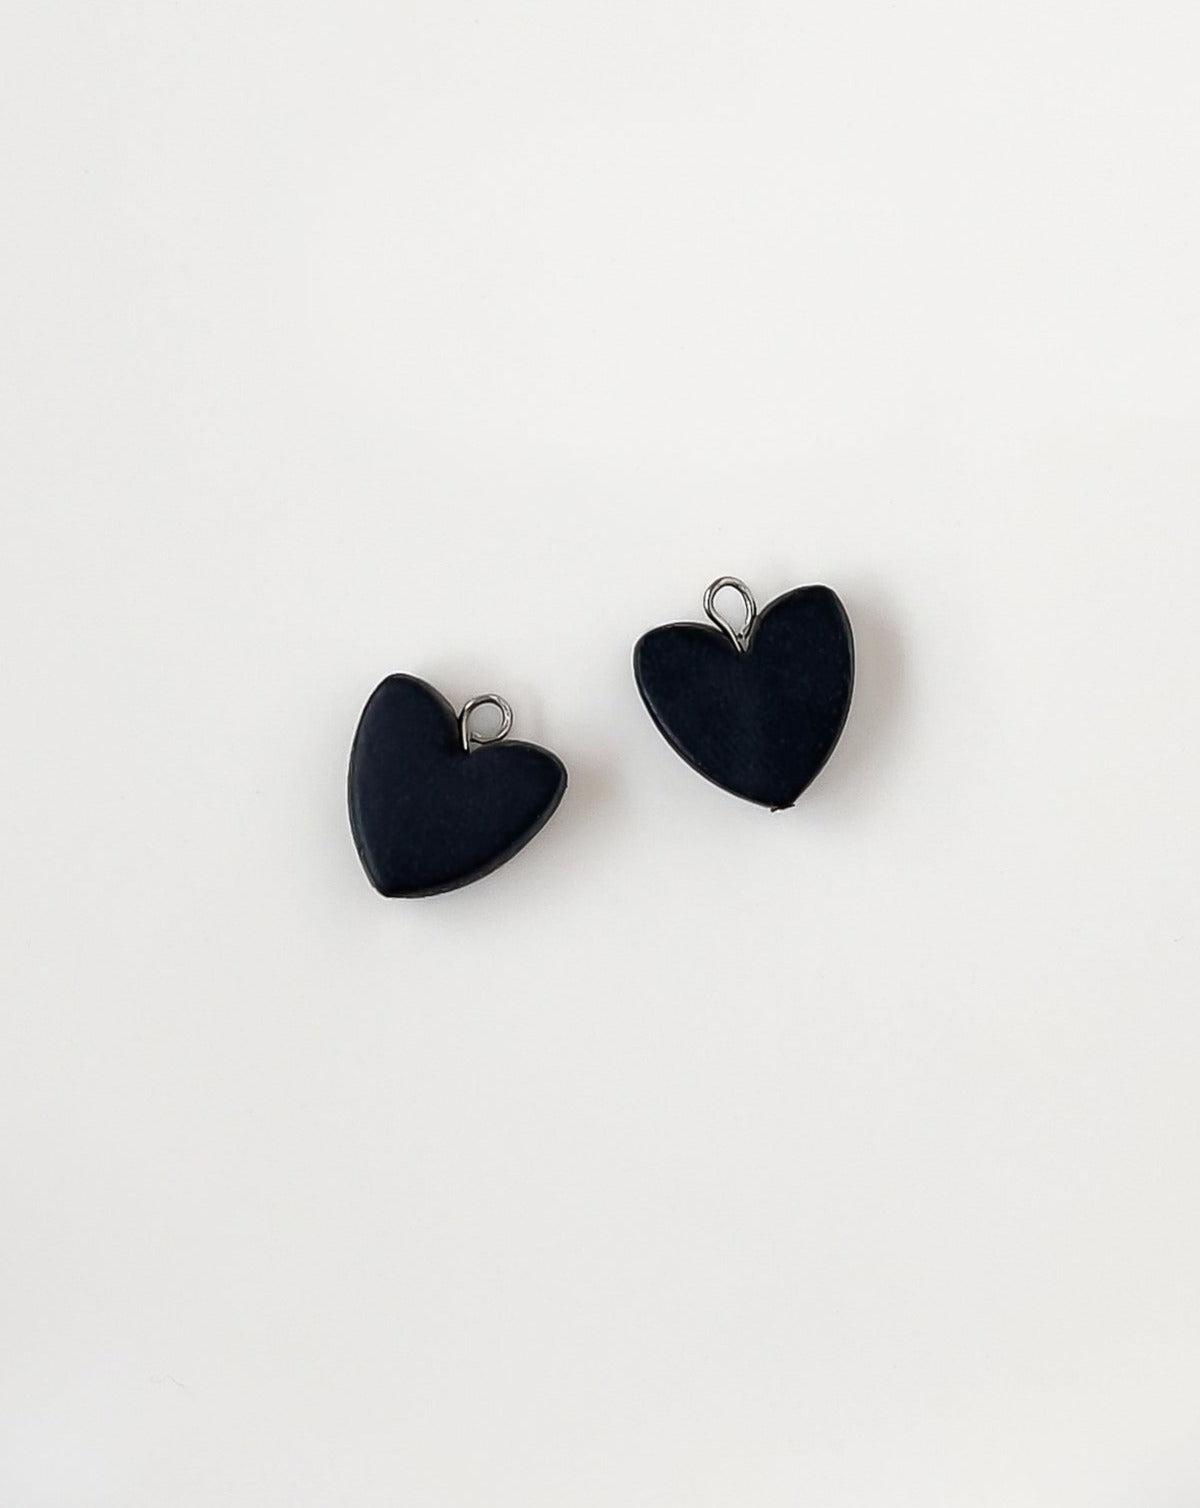 heart charms in color black.